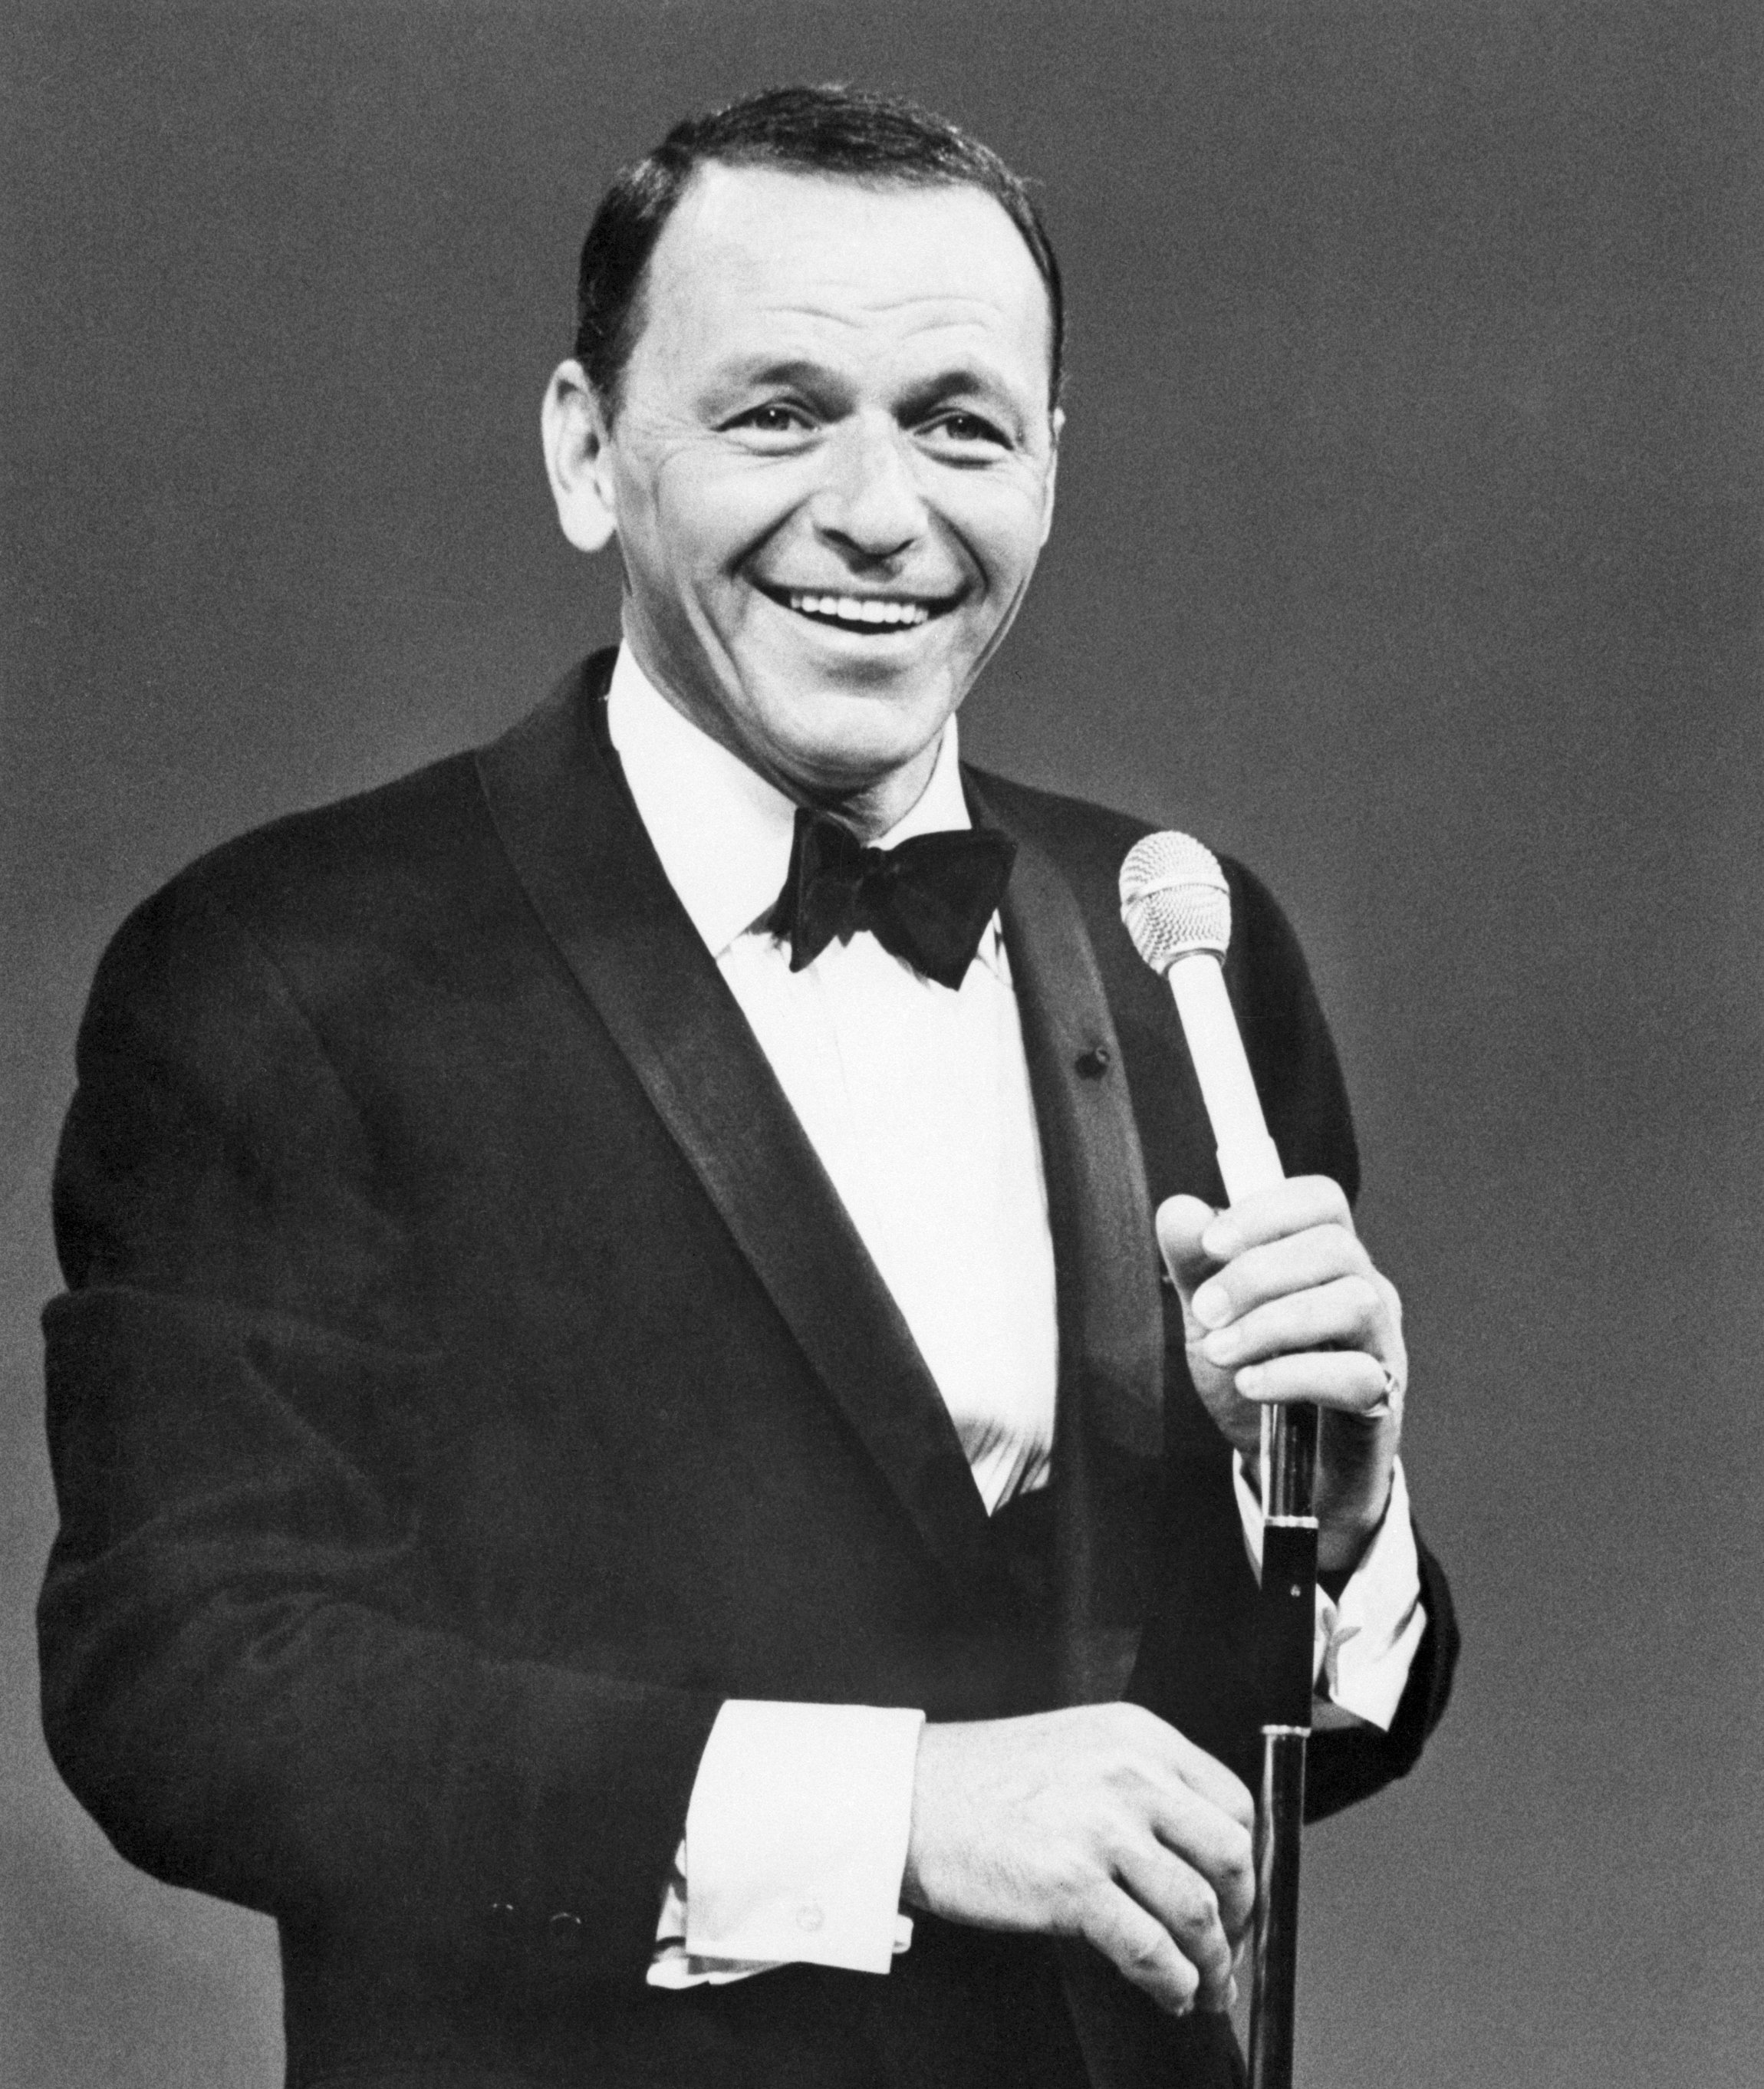 Frank Sinatra performs on his TV special Frank Sinatra: A Man and his Music, 1966. | Source: Getty Images